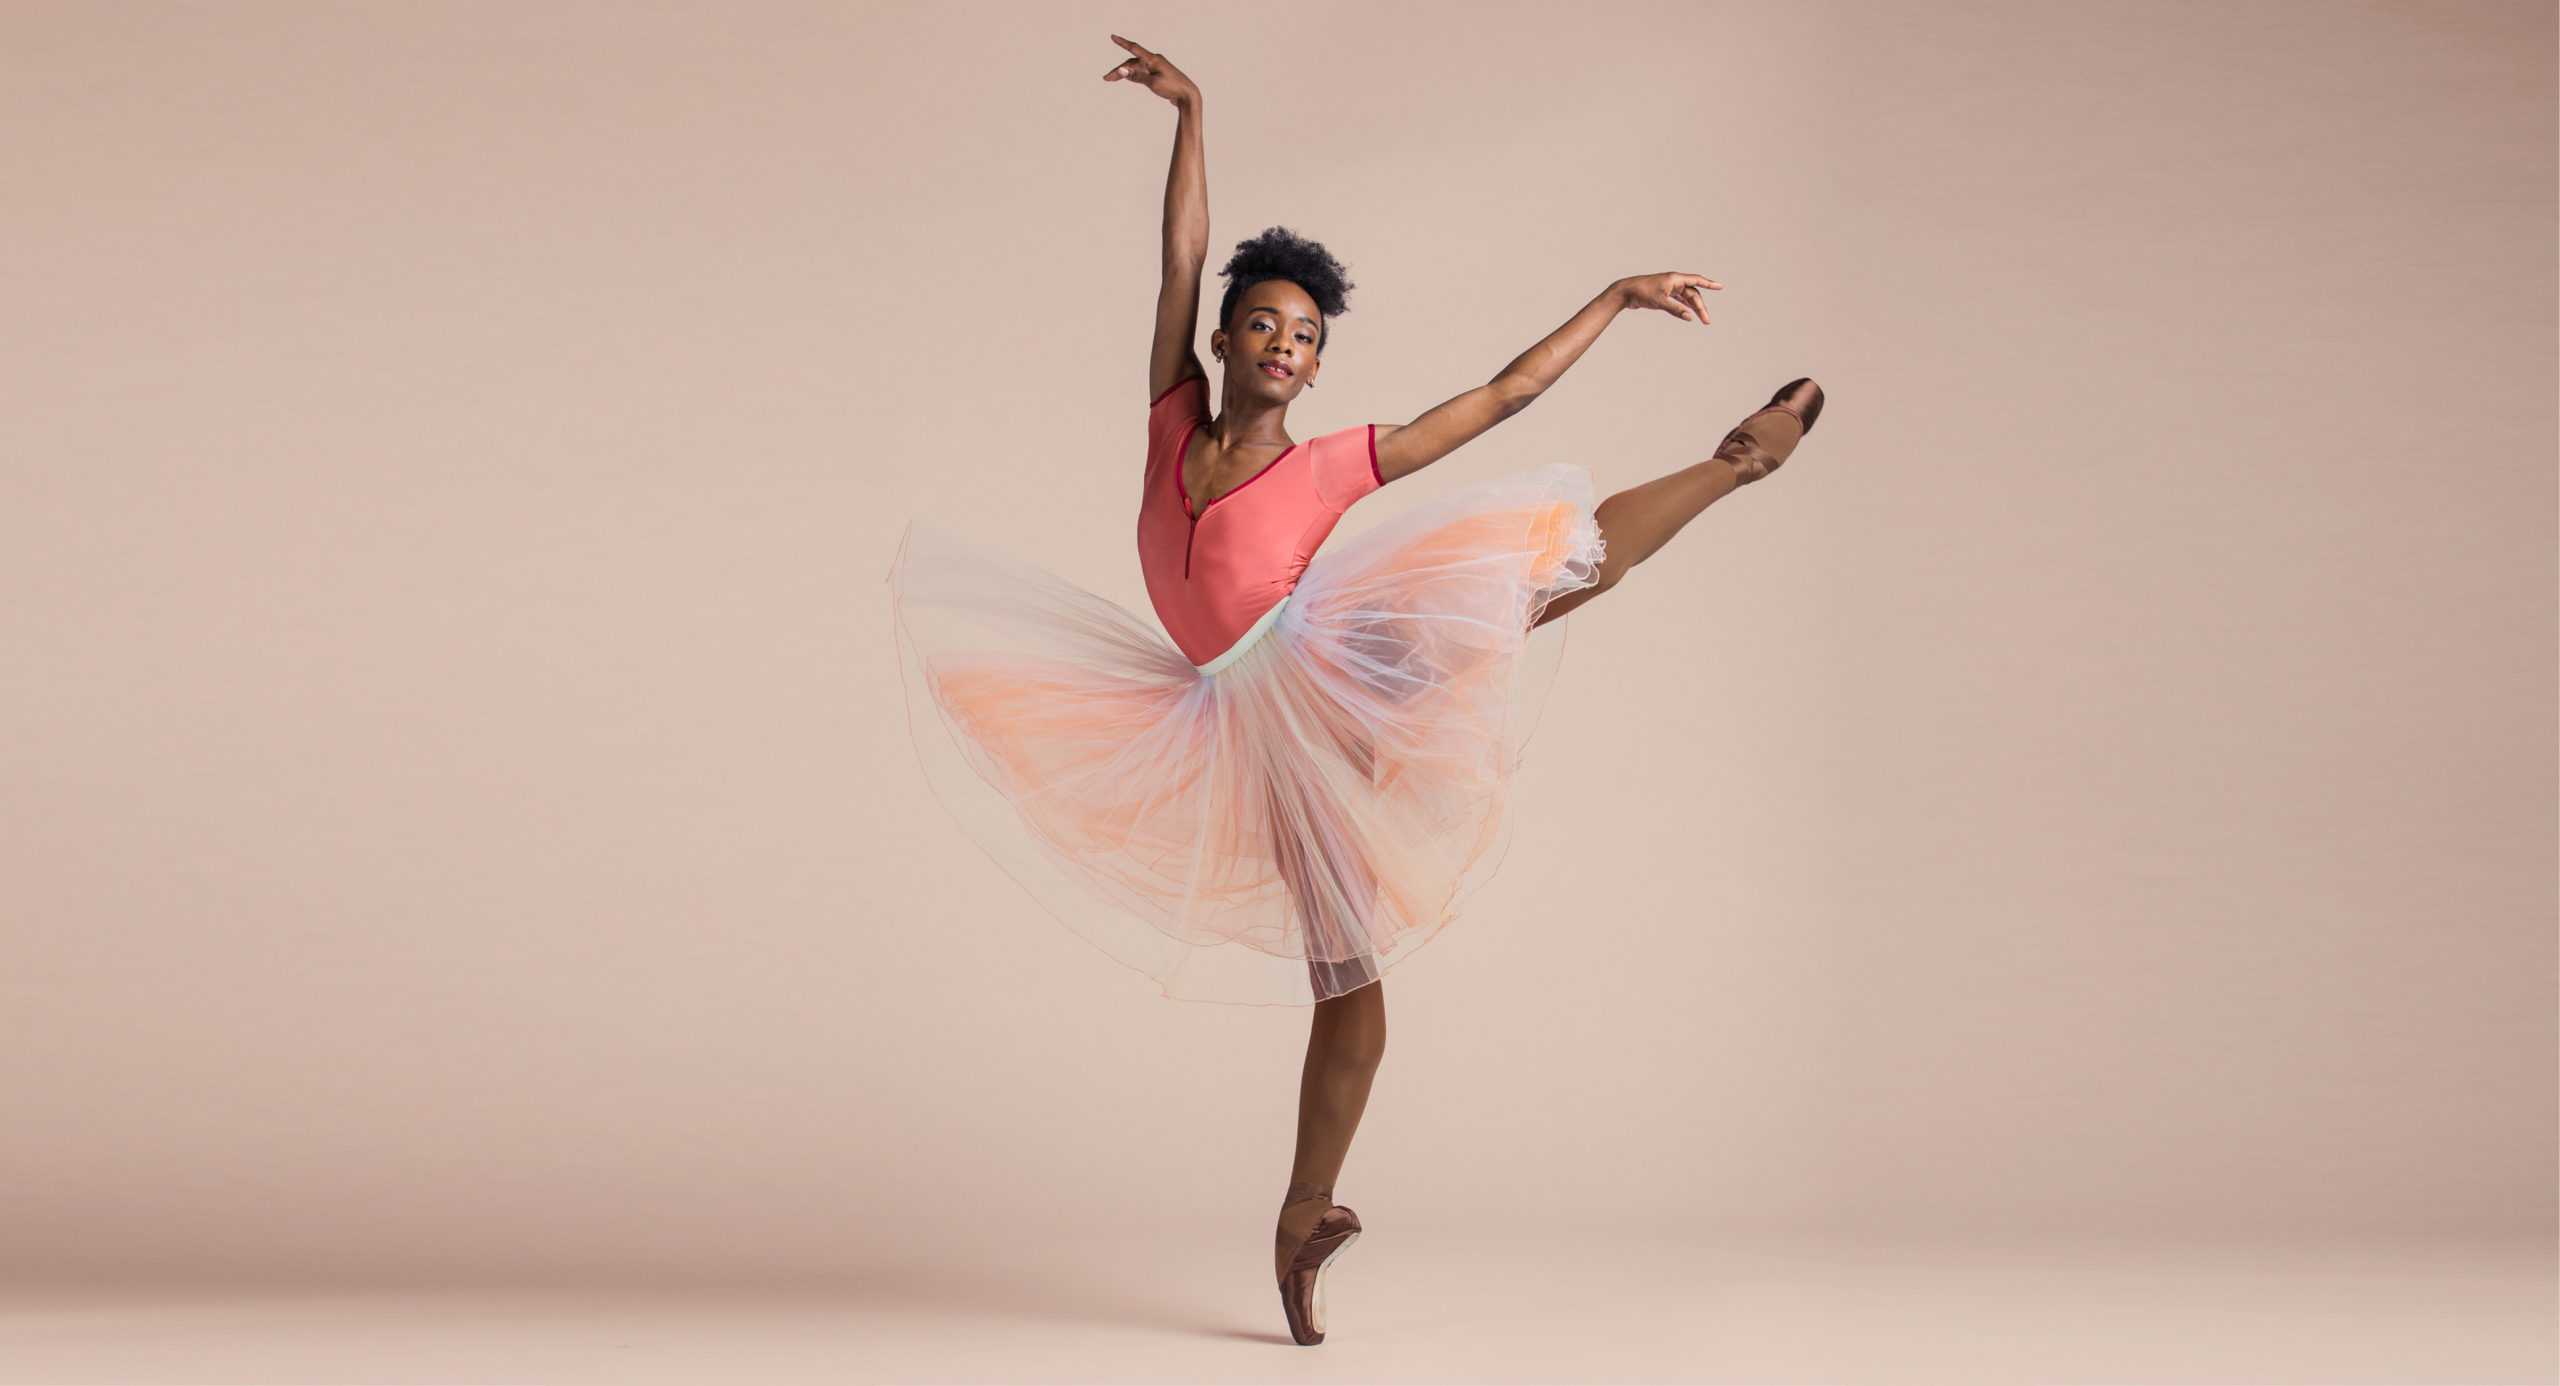 Ashton Edwards wears a pink leotard, brown pointe shoes and a long, peach tutu. He stands in front of a taupe backdrop and performs a pique first arabesque on his right leg and looks confidently towards the camera.